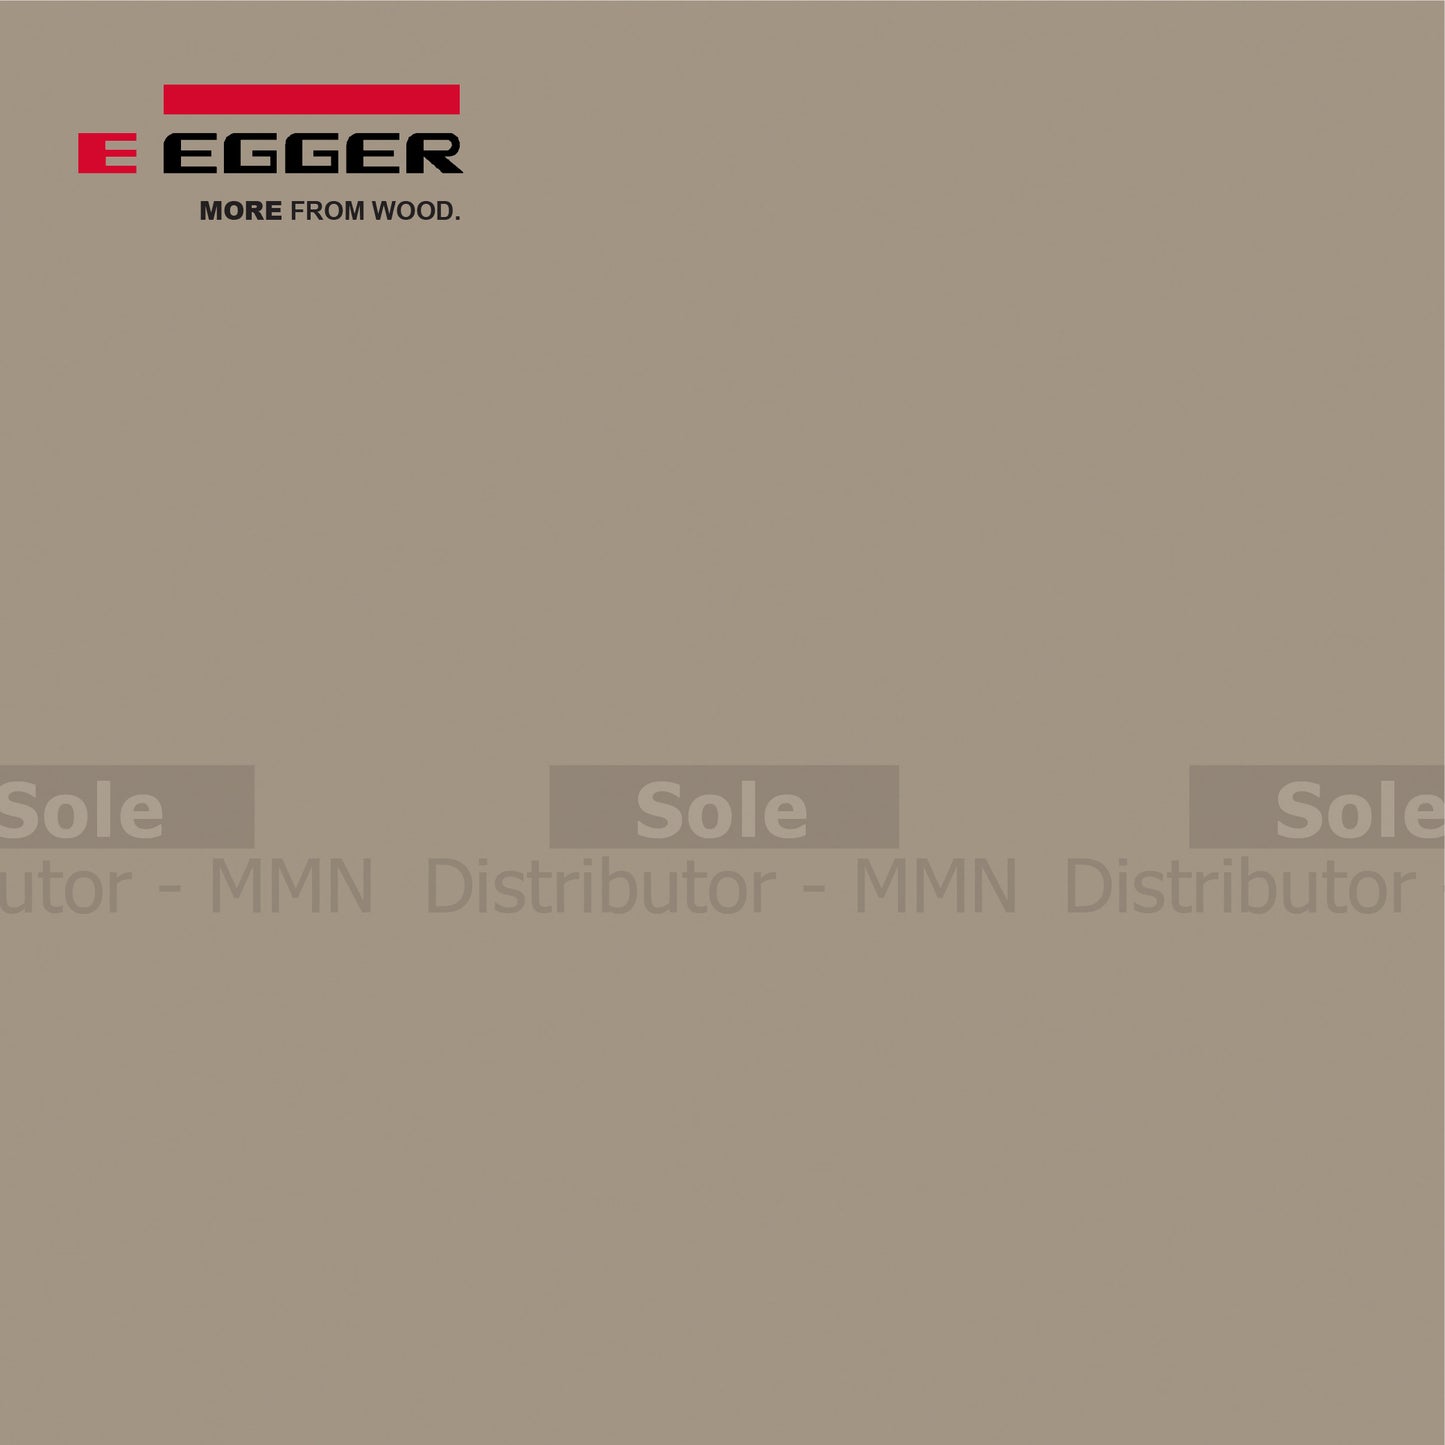 Egger Board Stone Grey Both Sides Printed, Thickness 18mm, Size 2800x2070mm - U727 ST9